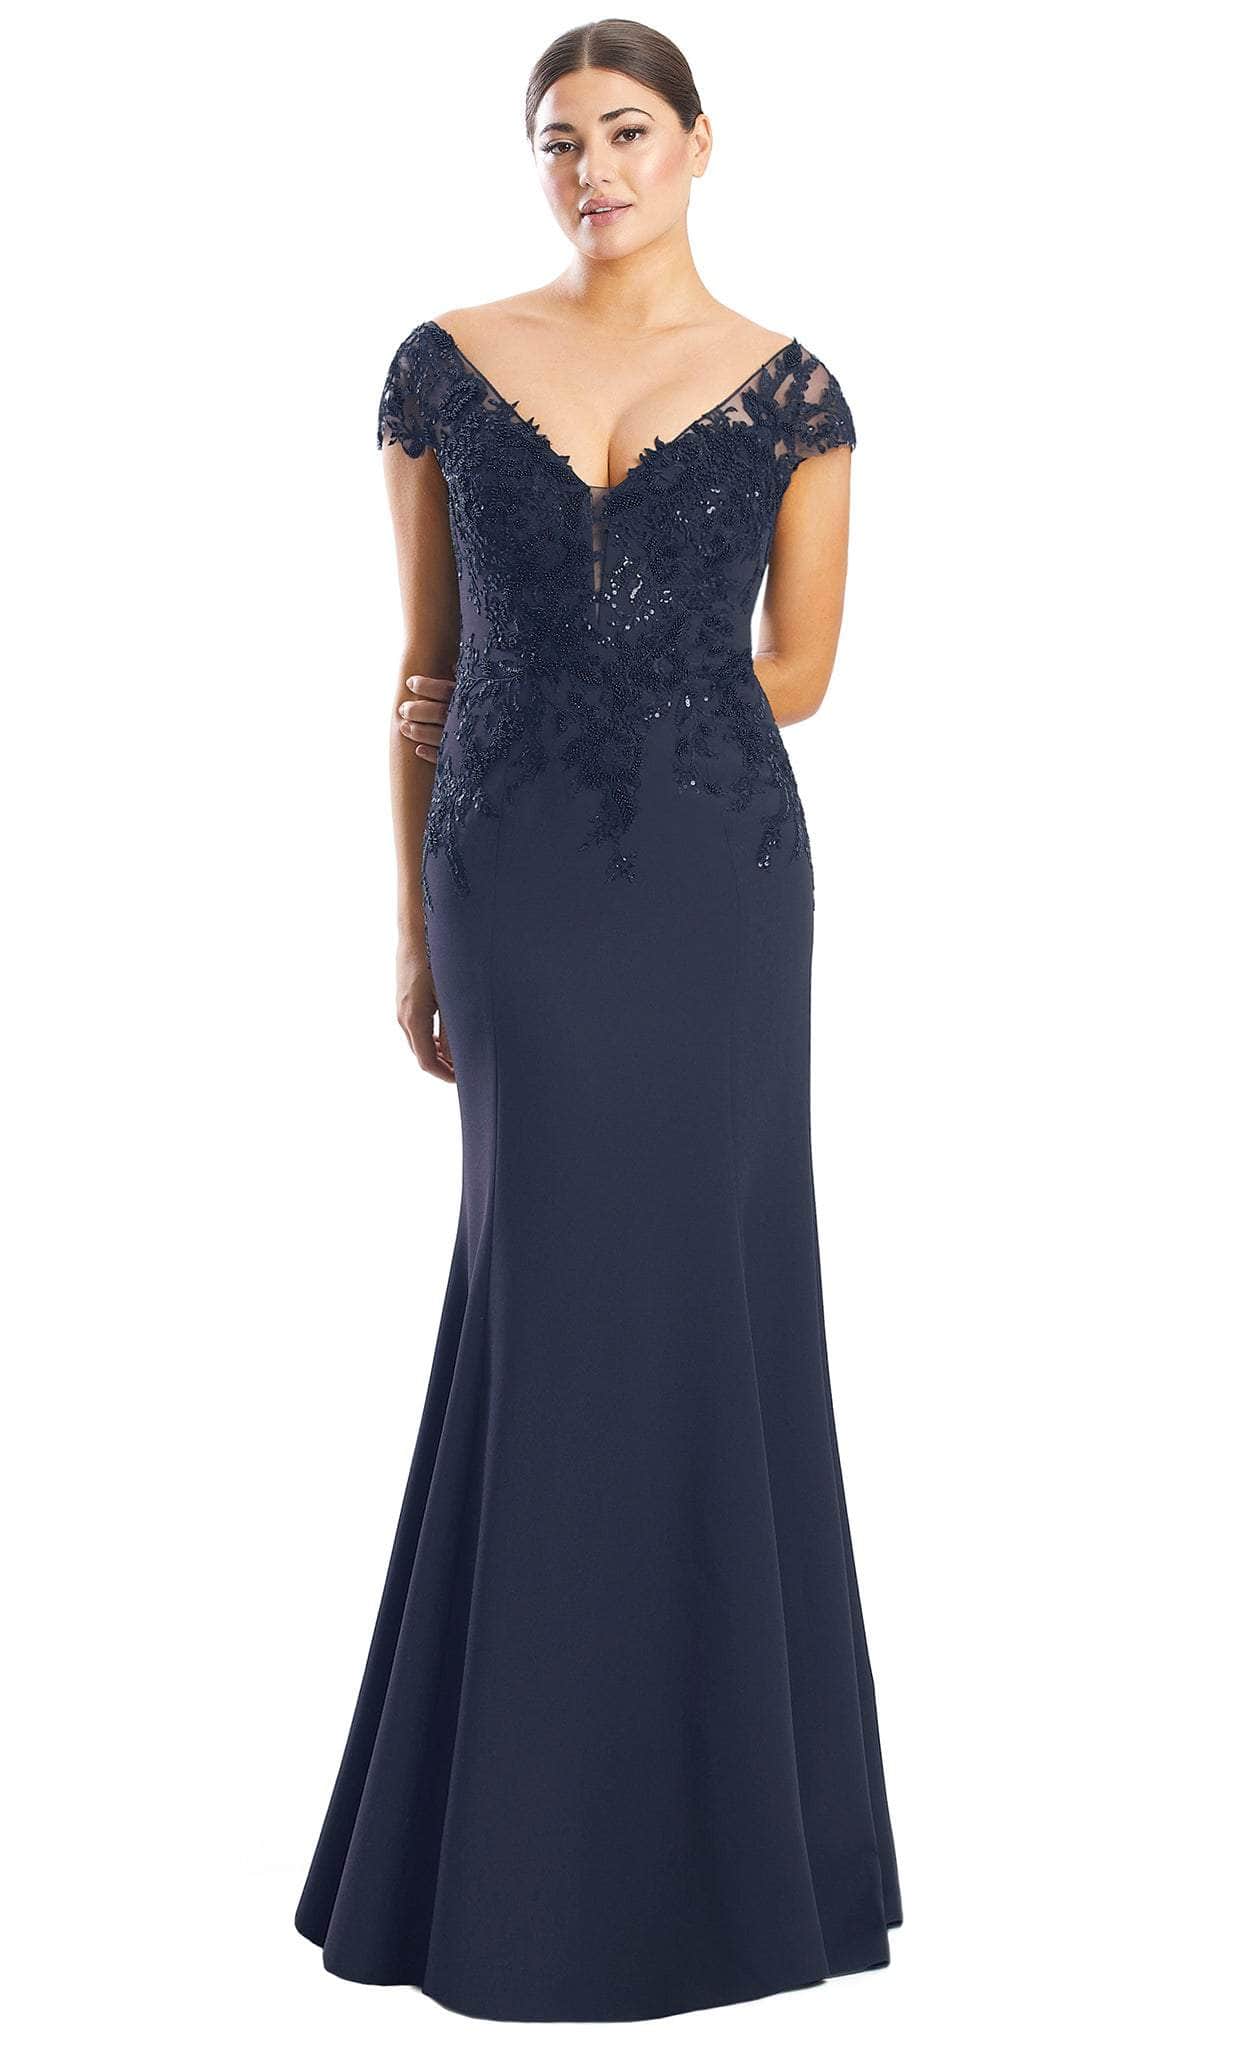 Alexander by Daymor 1752S23 - Modest V Neck Lace Formal Gown Evening Dresses 00 / Navy